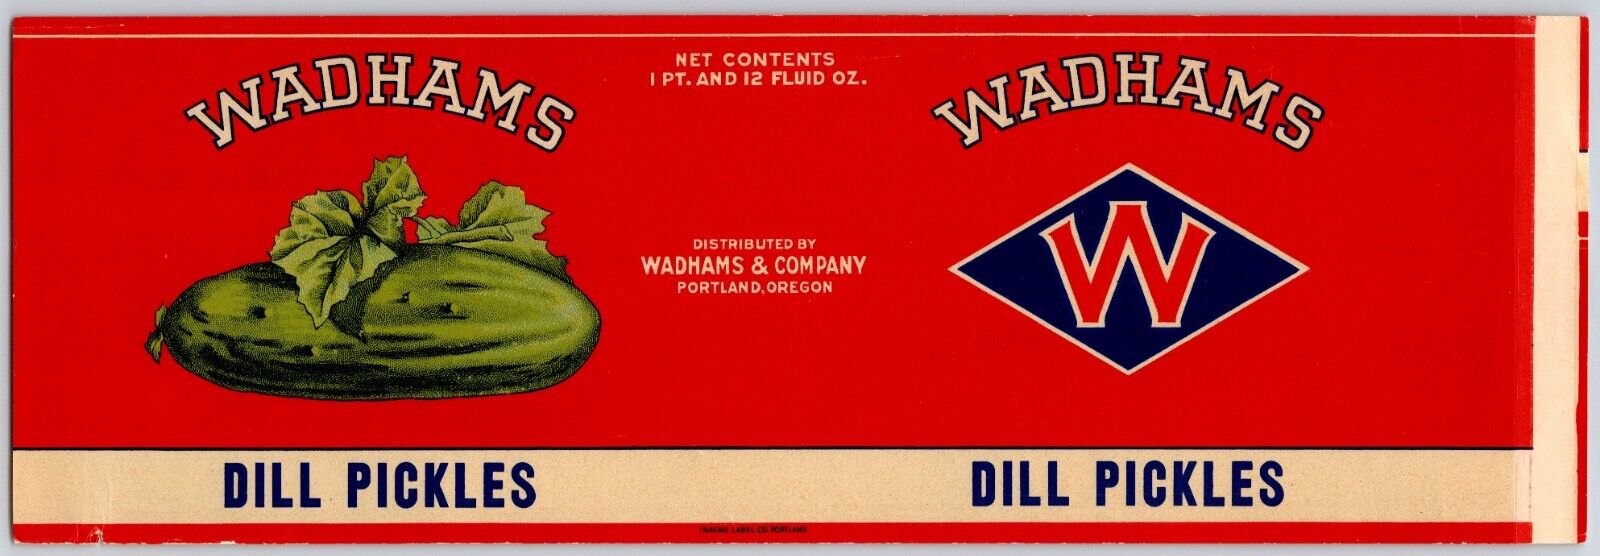 Wadhams Dill Pickles Paper Can Label Portland, OR c1920's-30's VGC Scarce